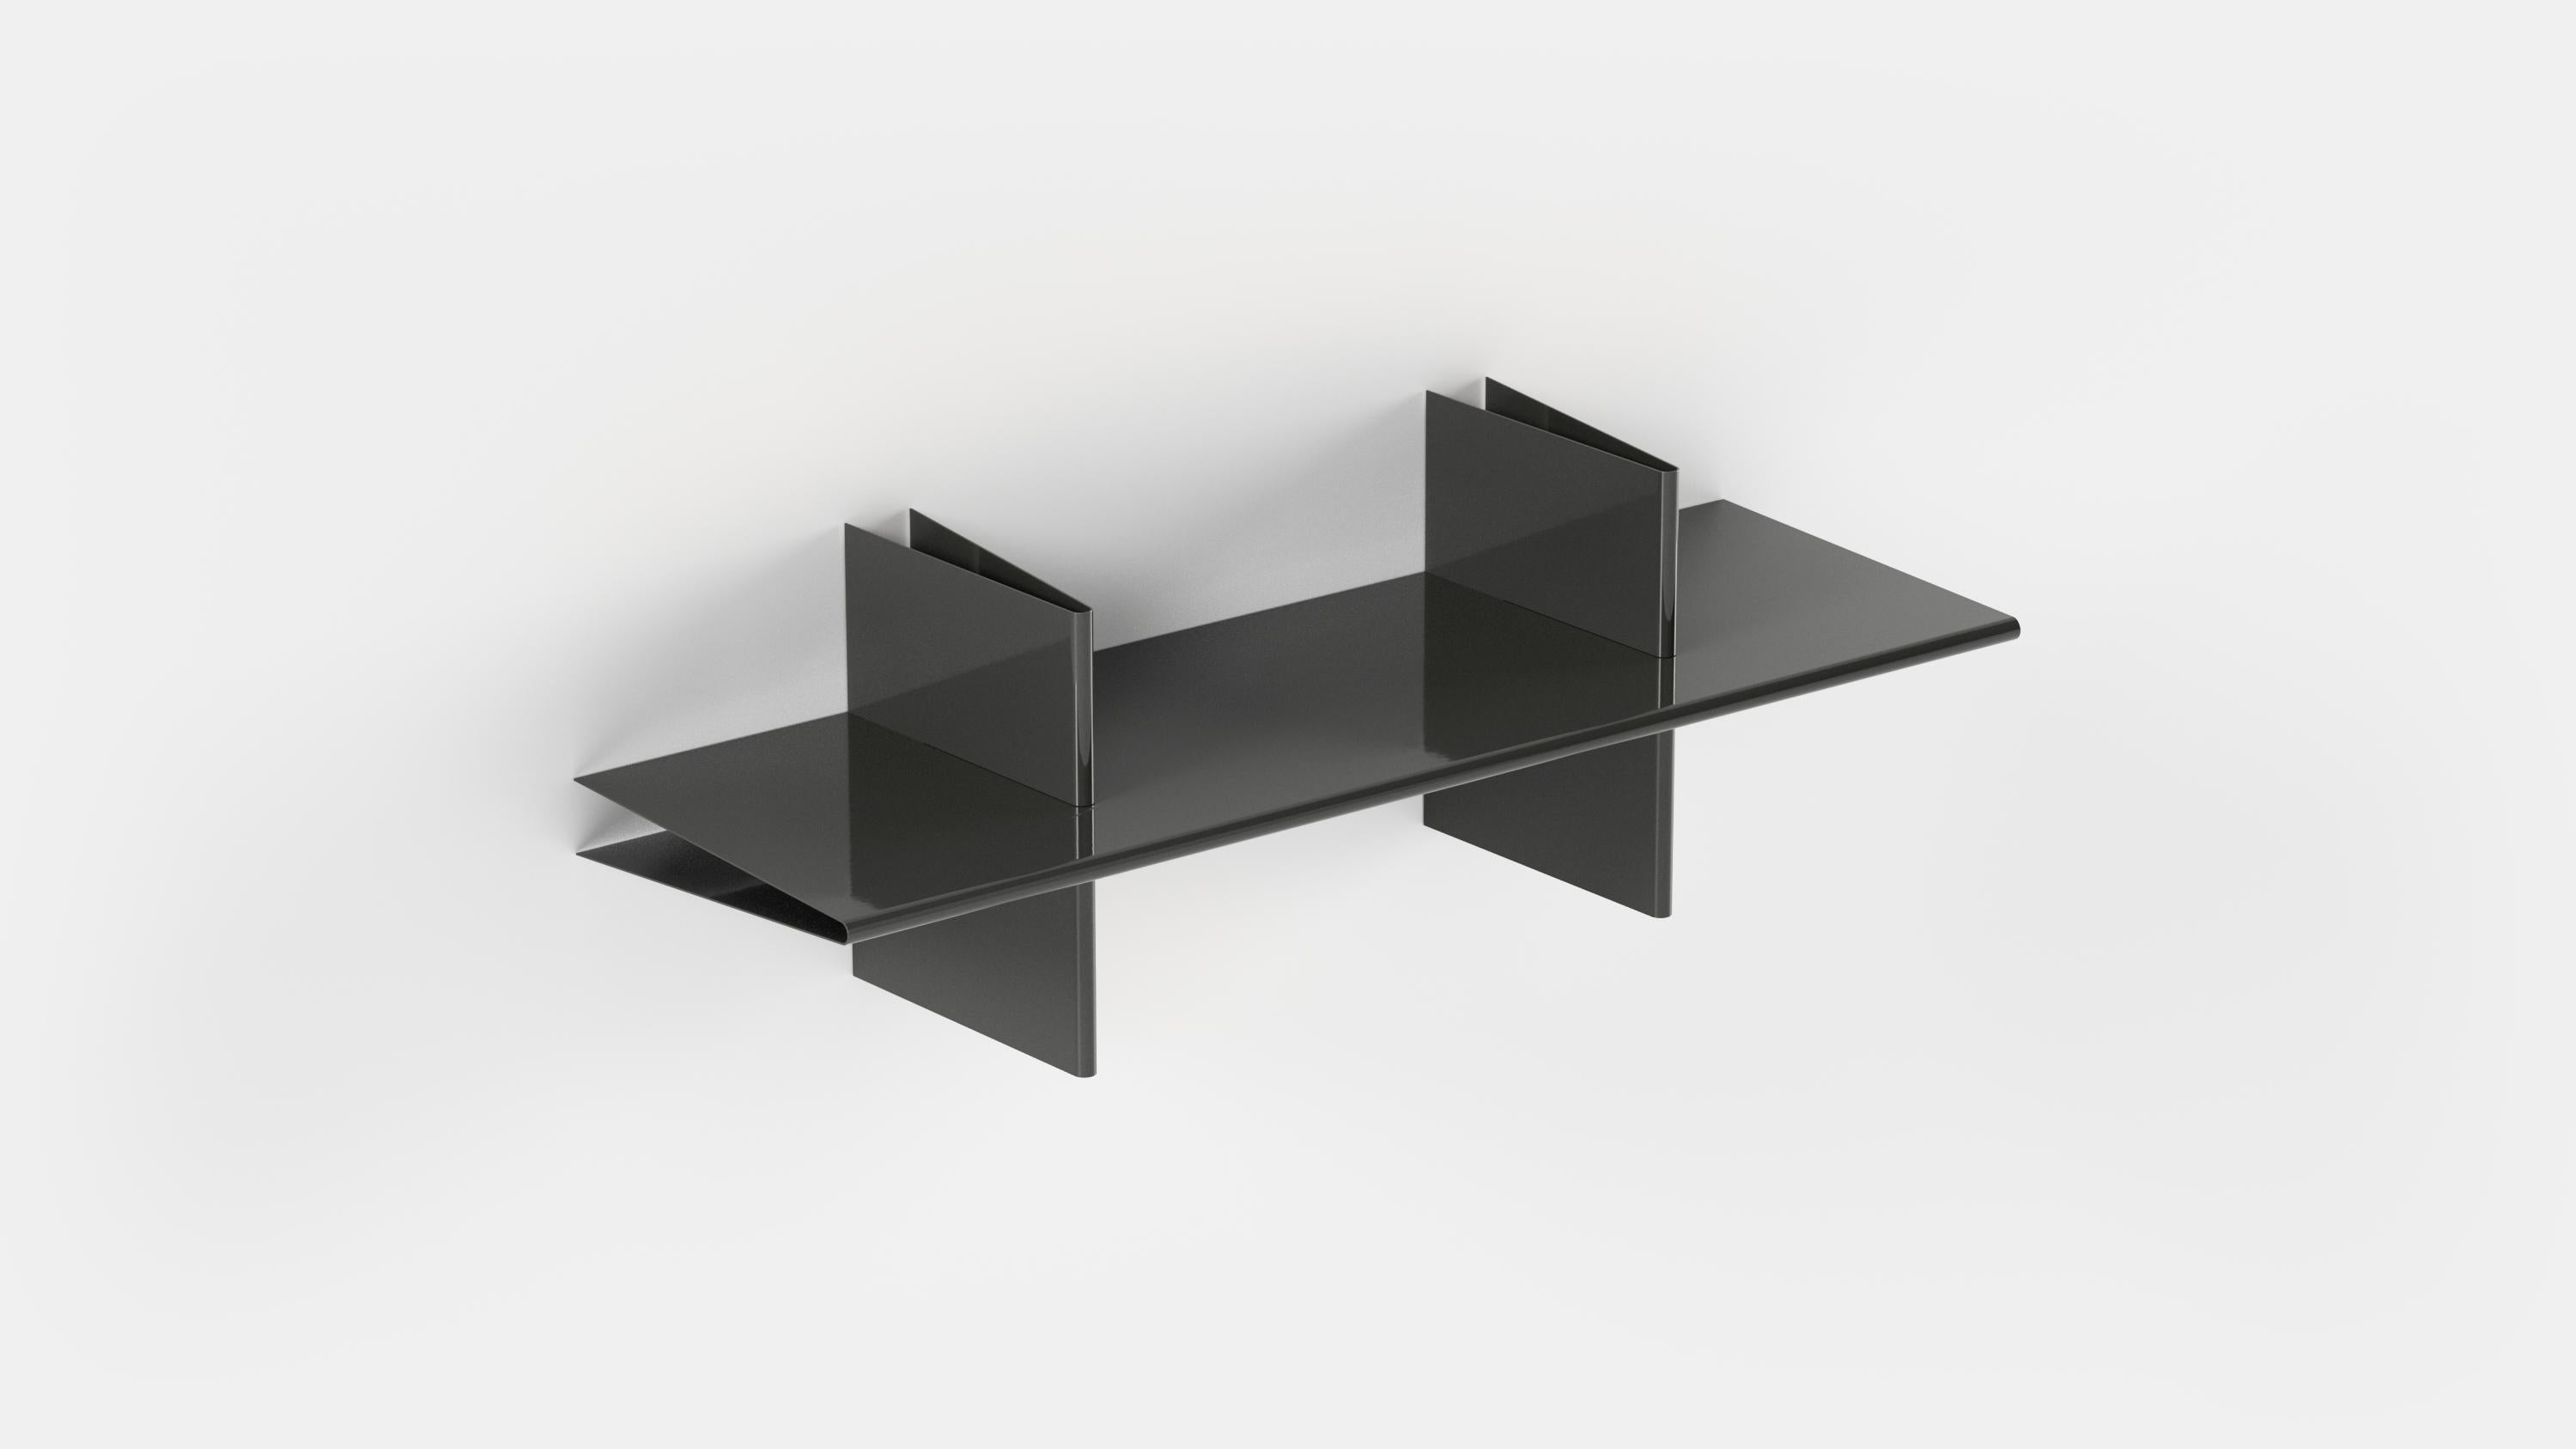 The CLIP shelf is made from powder-coated steel and is consisting of three folded metal plates that seamlessly interlock and effortlessly assembles into a sturdy storage solution. The carefully considered proportions allow for perfect alignment of